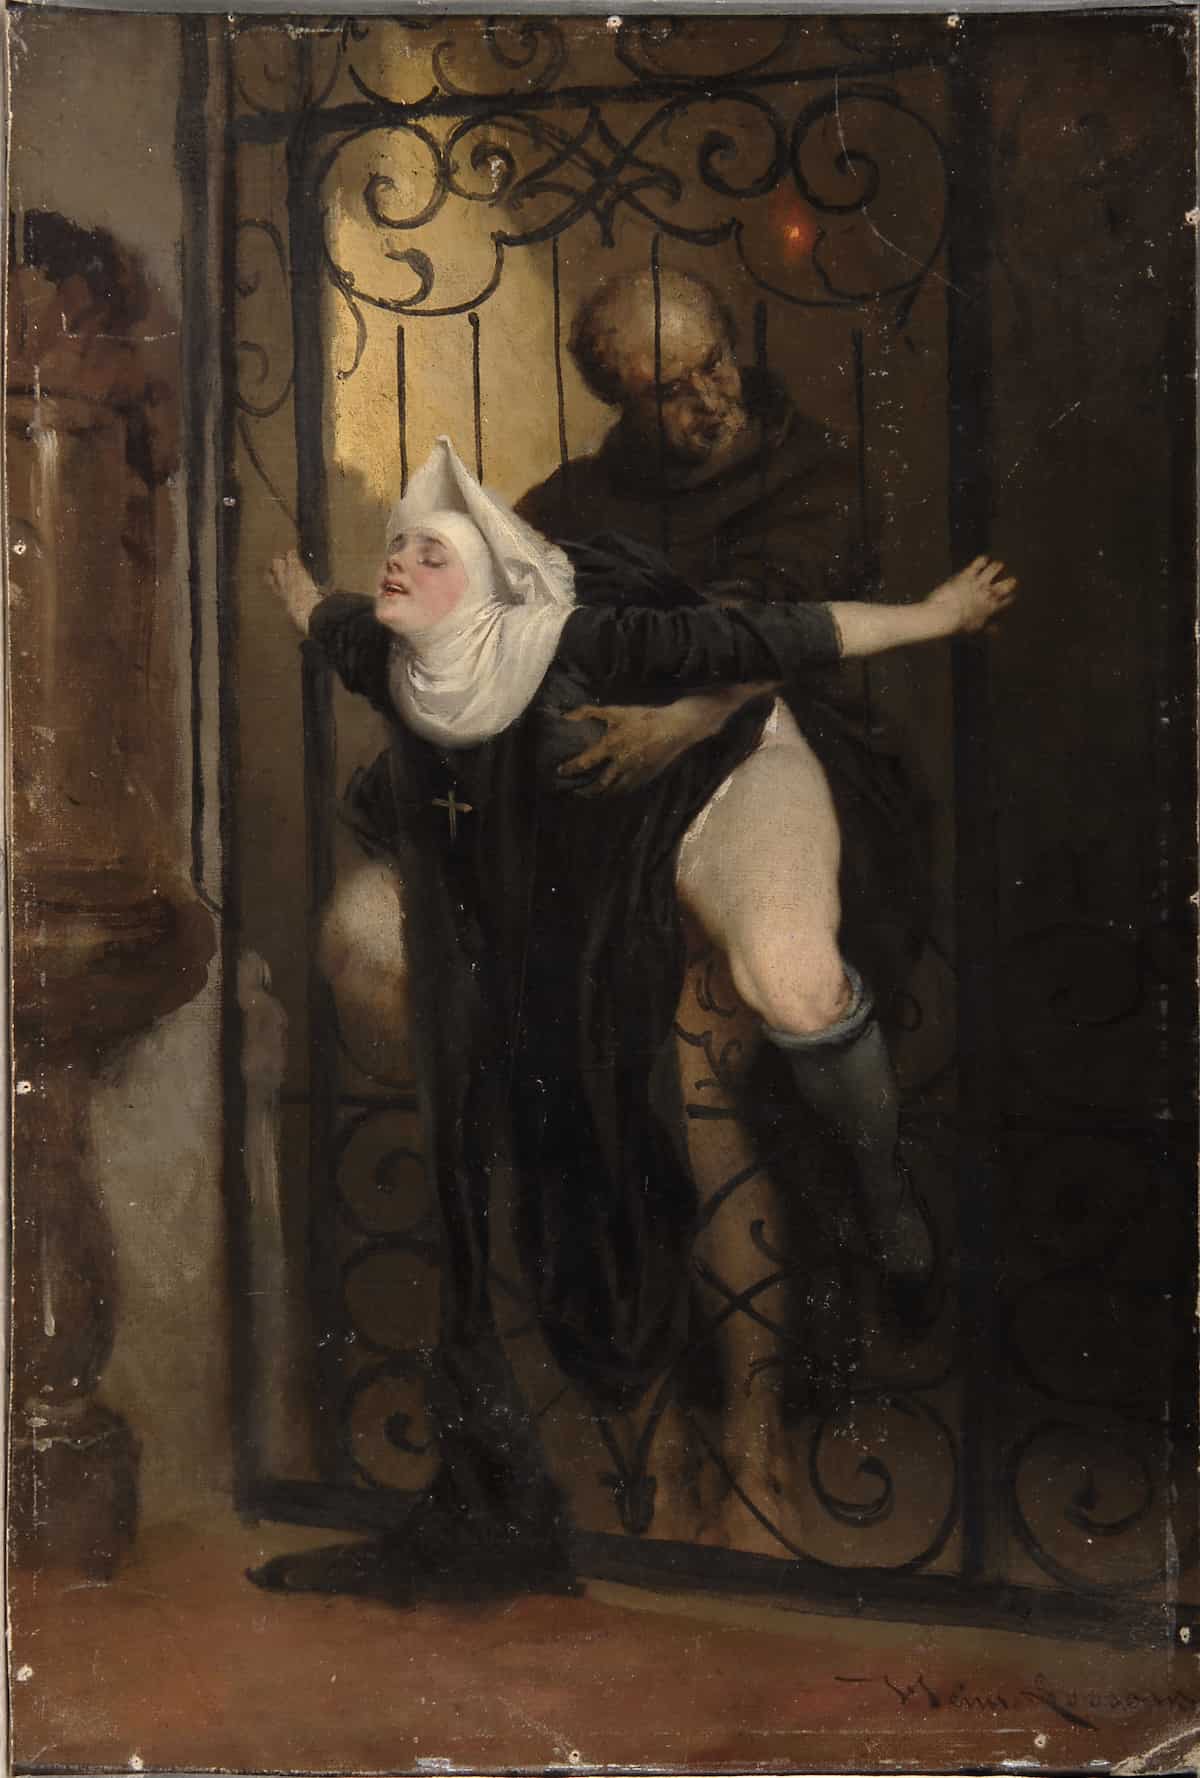 The Sin, Heinrich Lossow